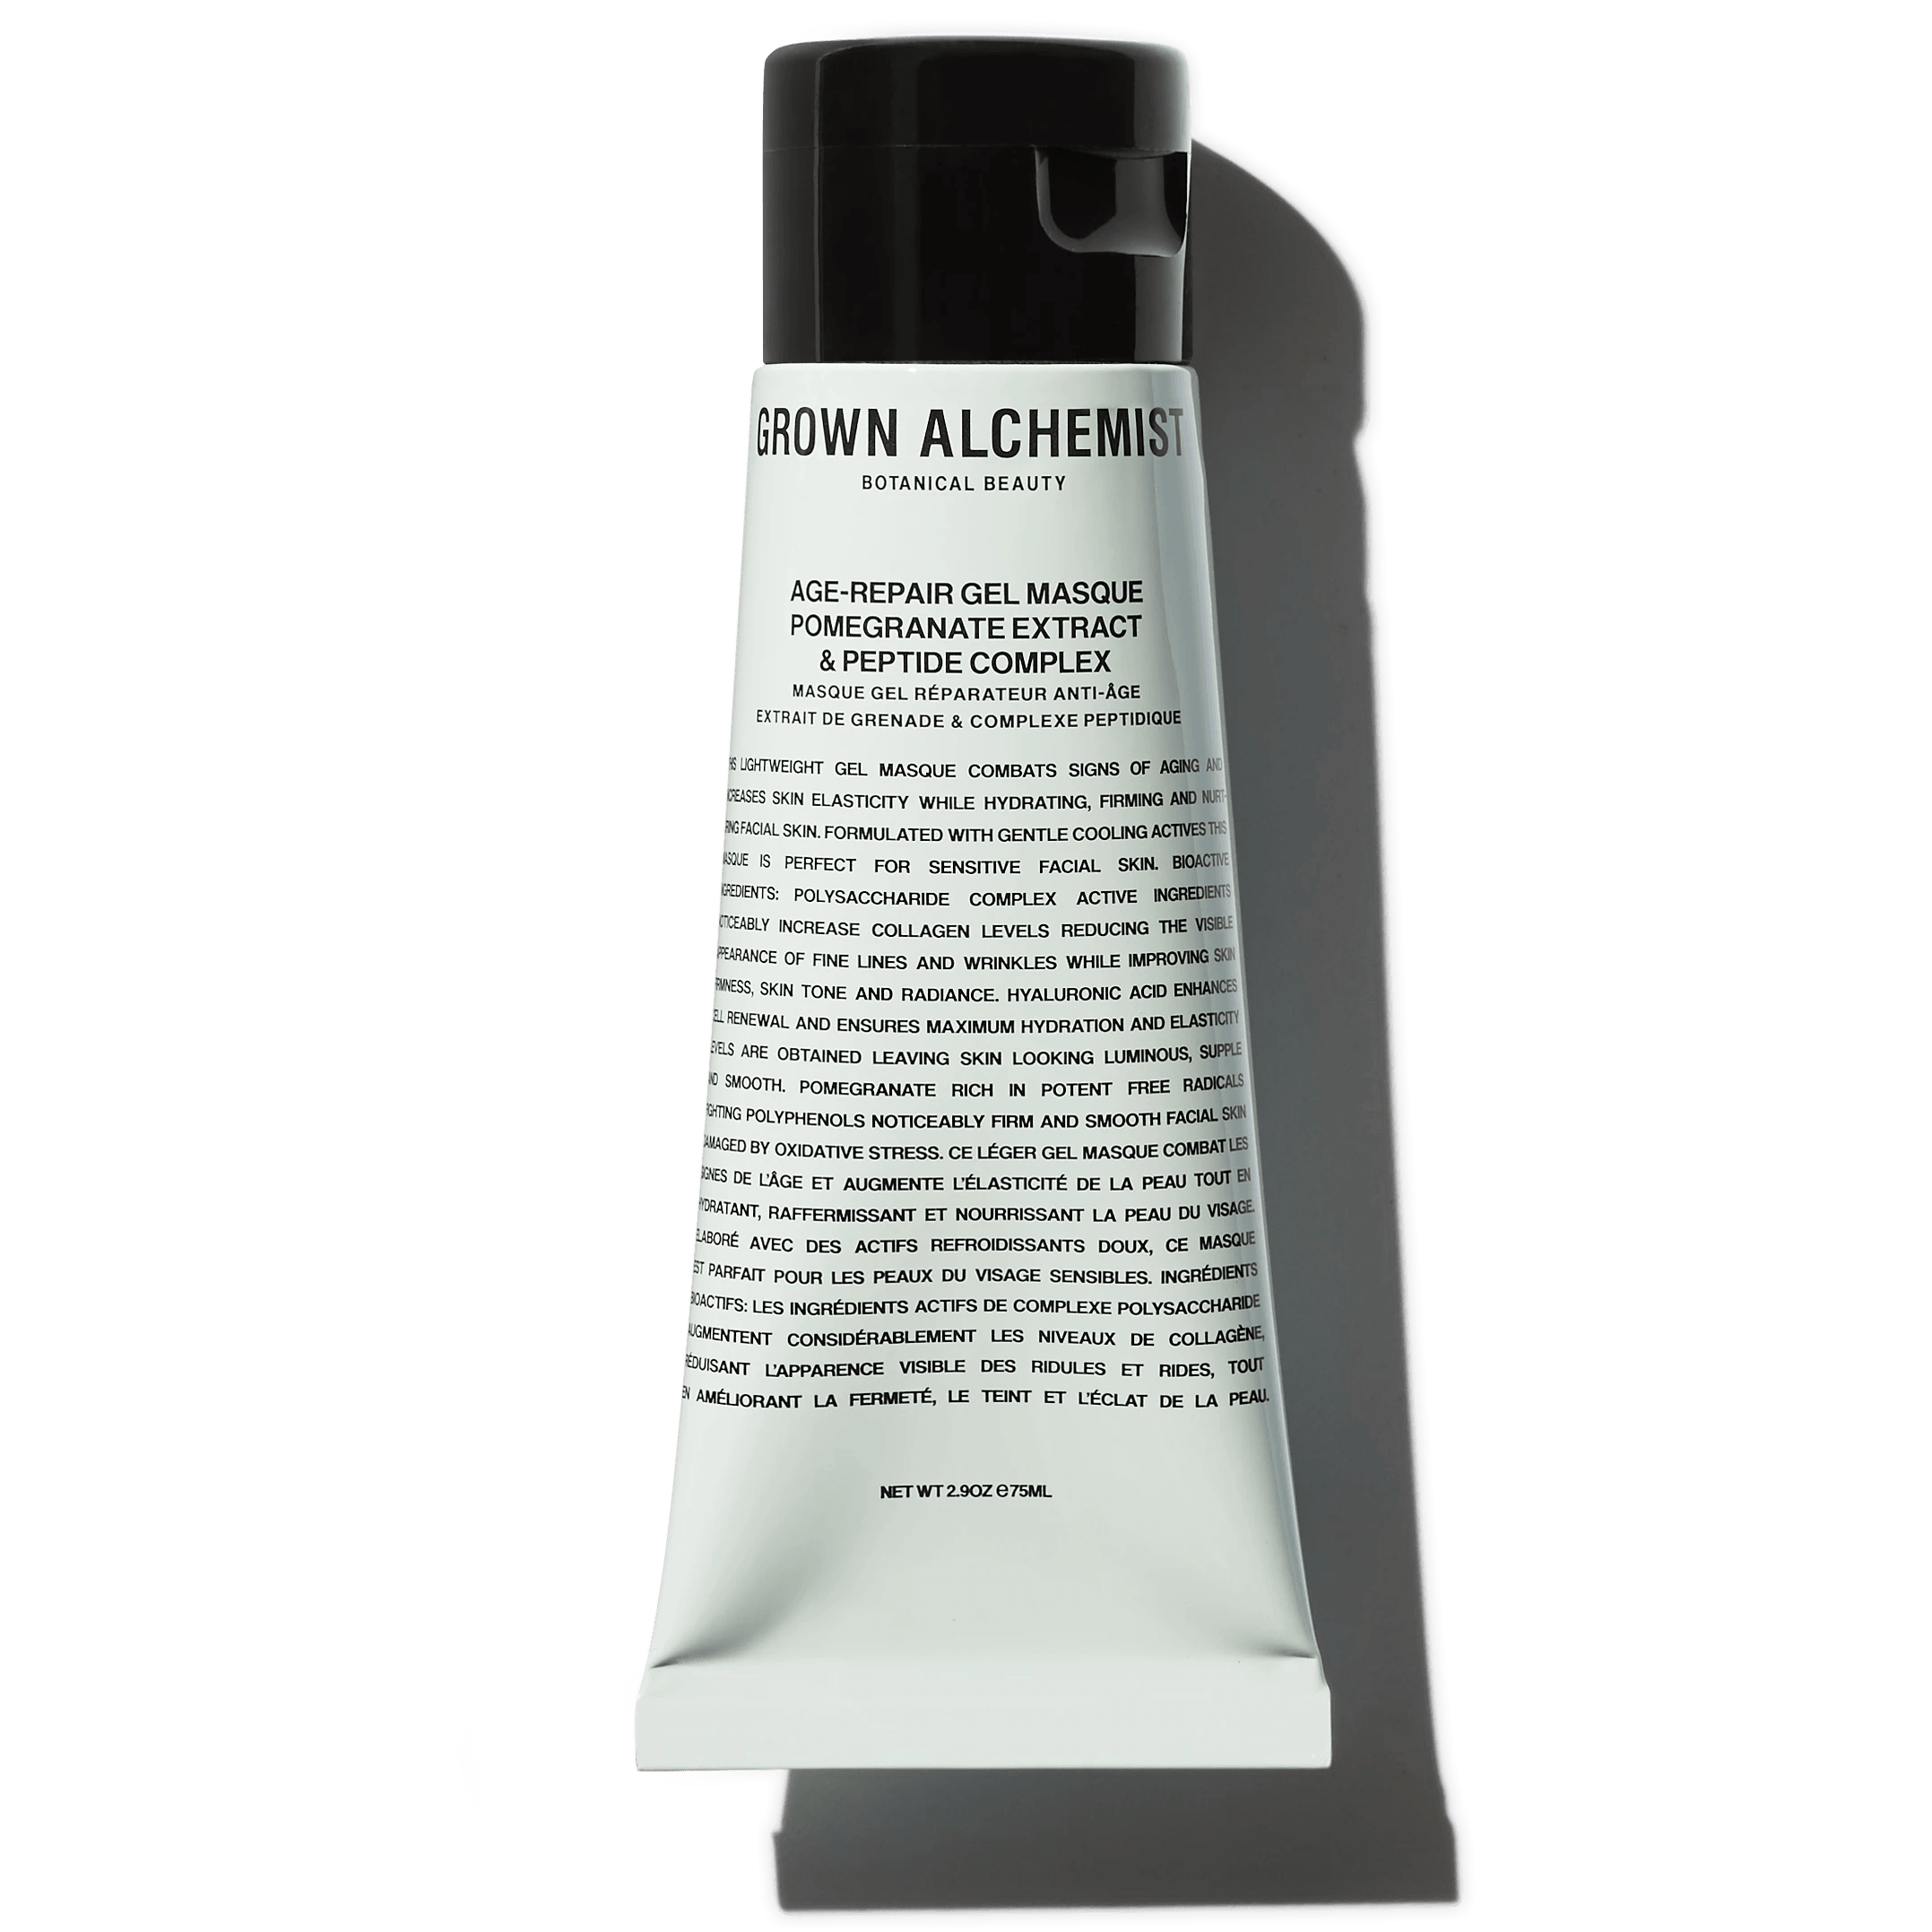 Grown Alchemist Age-Repair Gel Masque: Pomegranate Extract, Peptide Complex at Socialite Beauty Canada